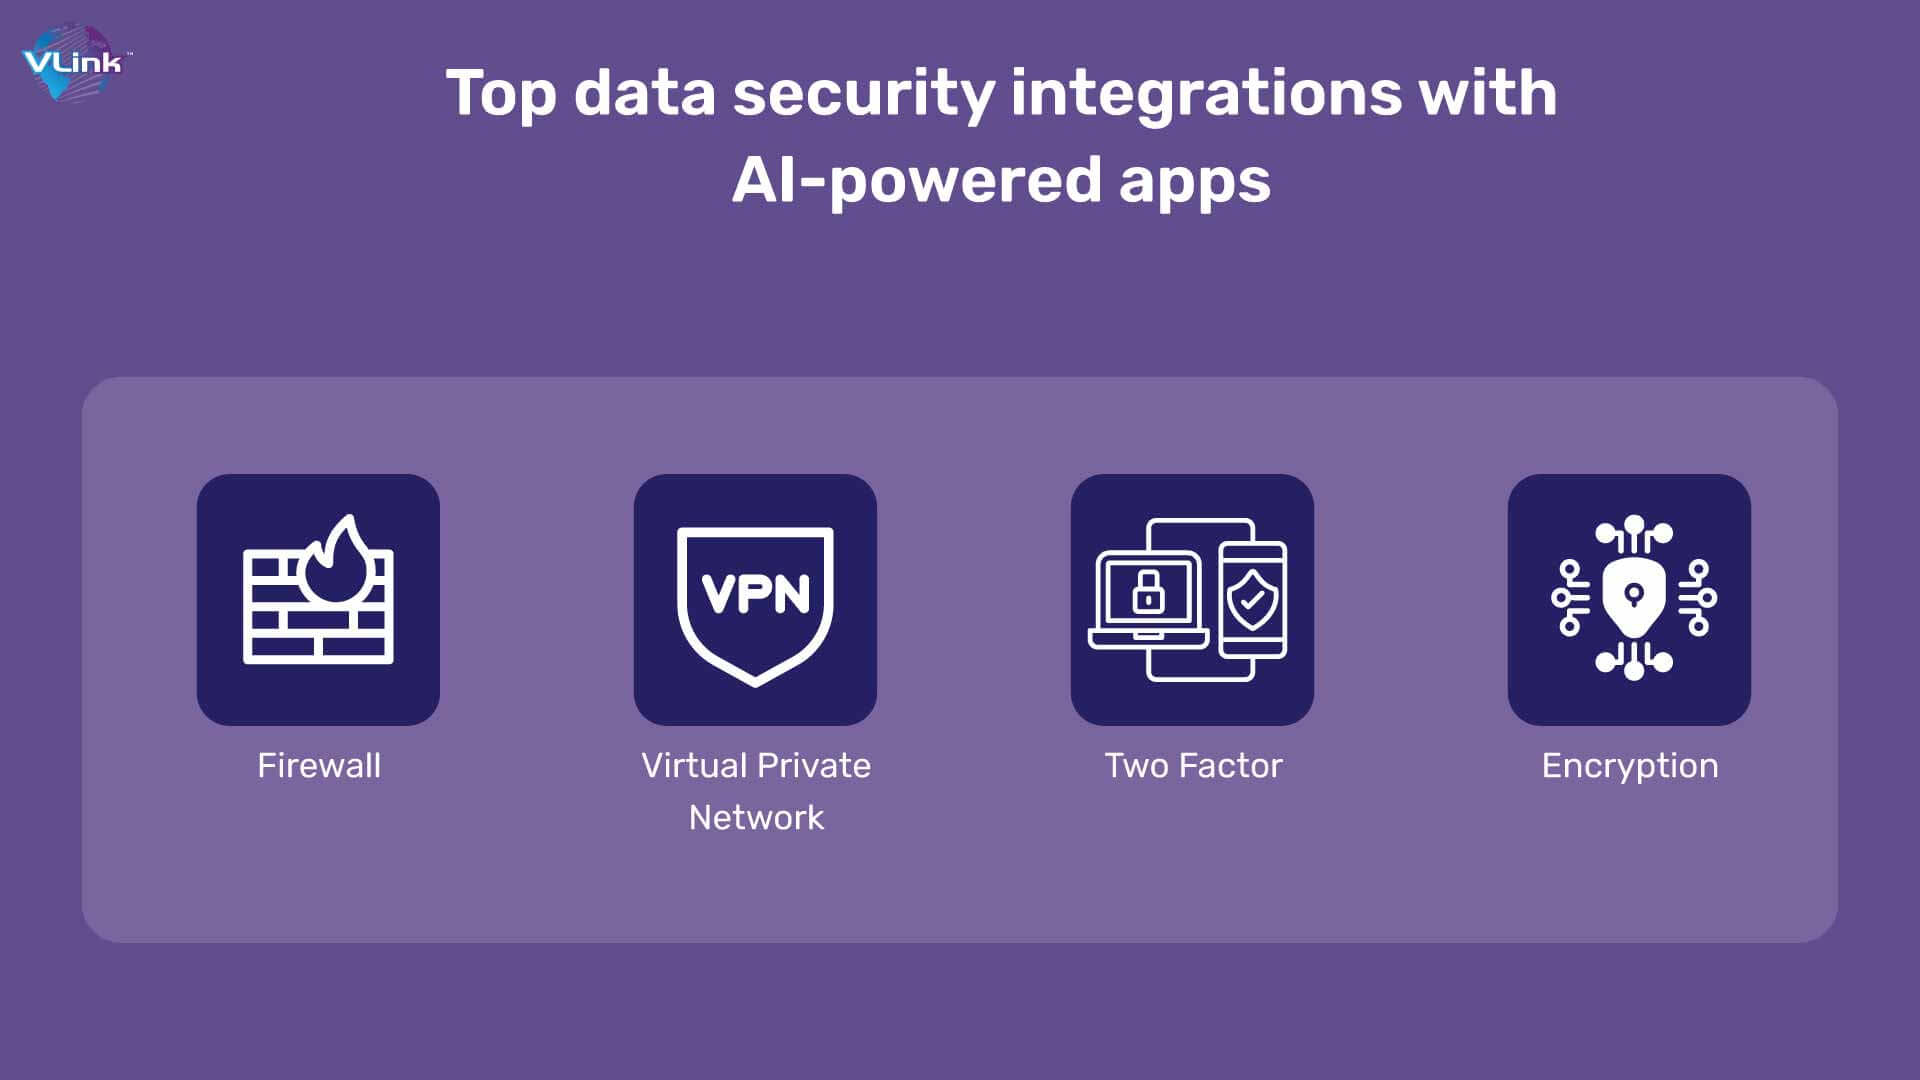 Top data security integrations with AI-powered apps